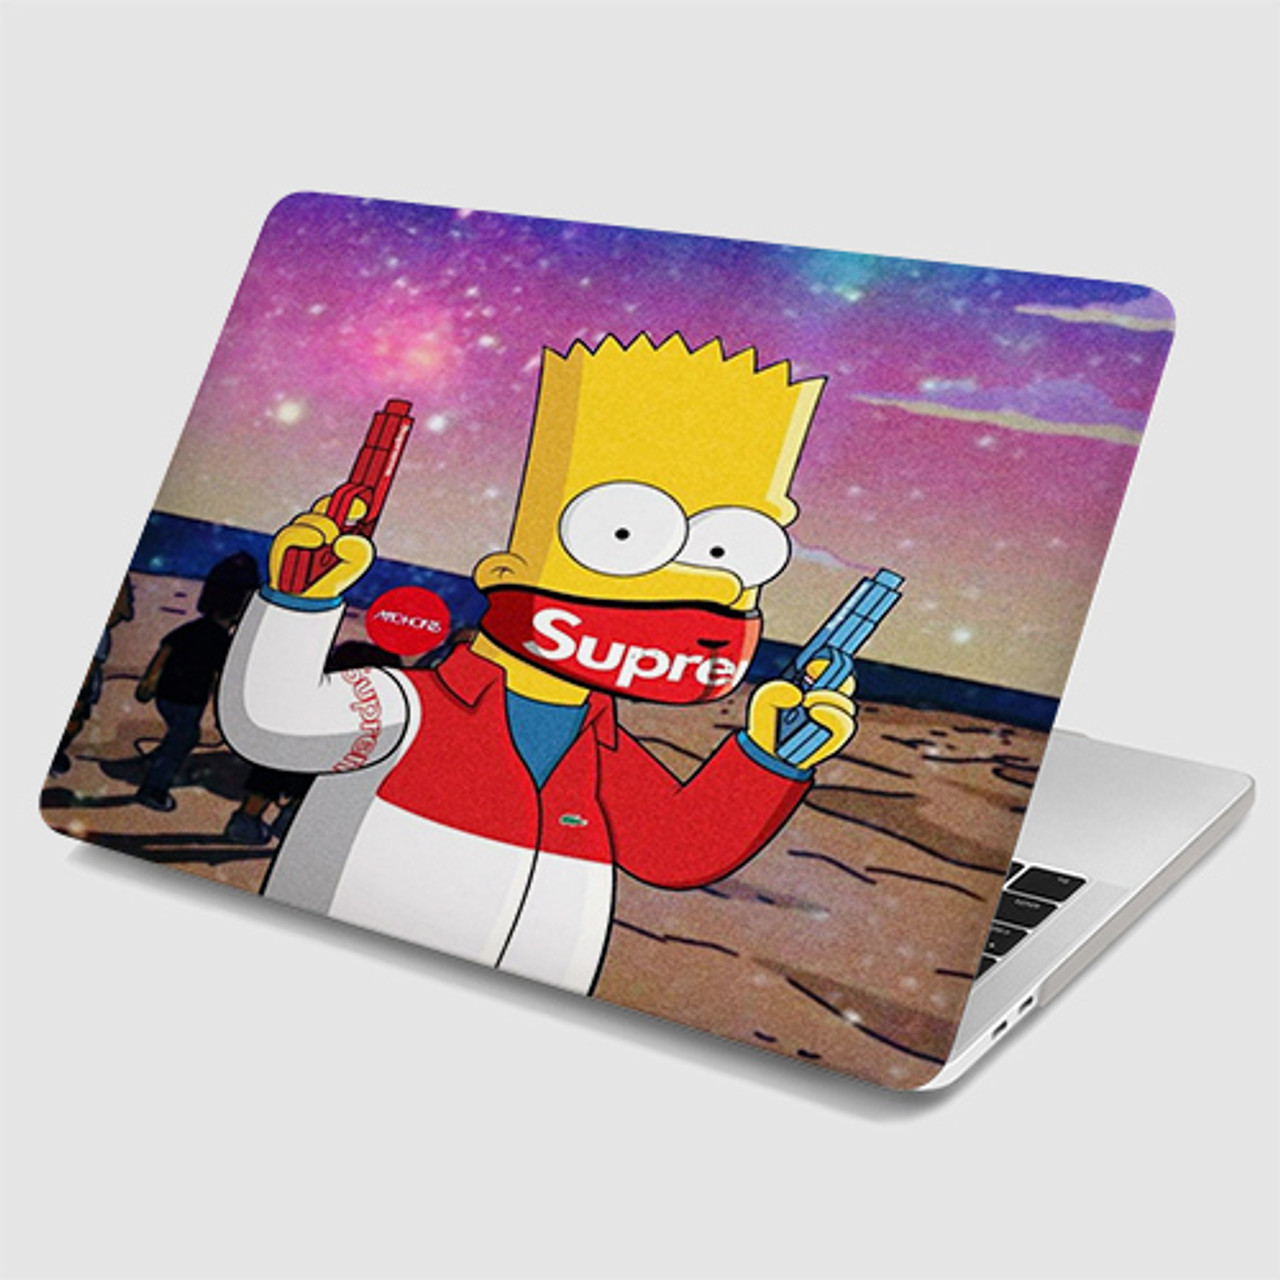 Pastele Bart Simpsons Supreme Galaxy MacBook Case Custom Personalized Smart  Protective Cover for MacBook MacBook Pro MacBook Pro Touch MacBook Pro